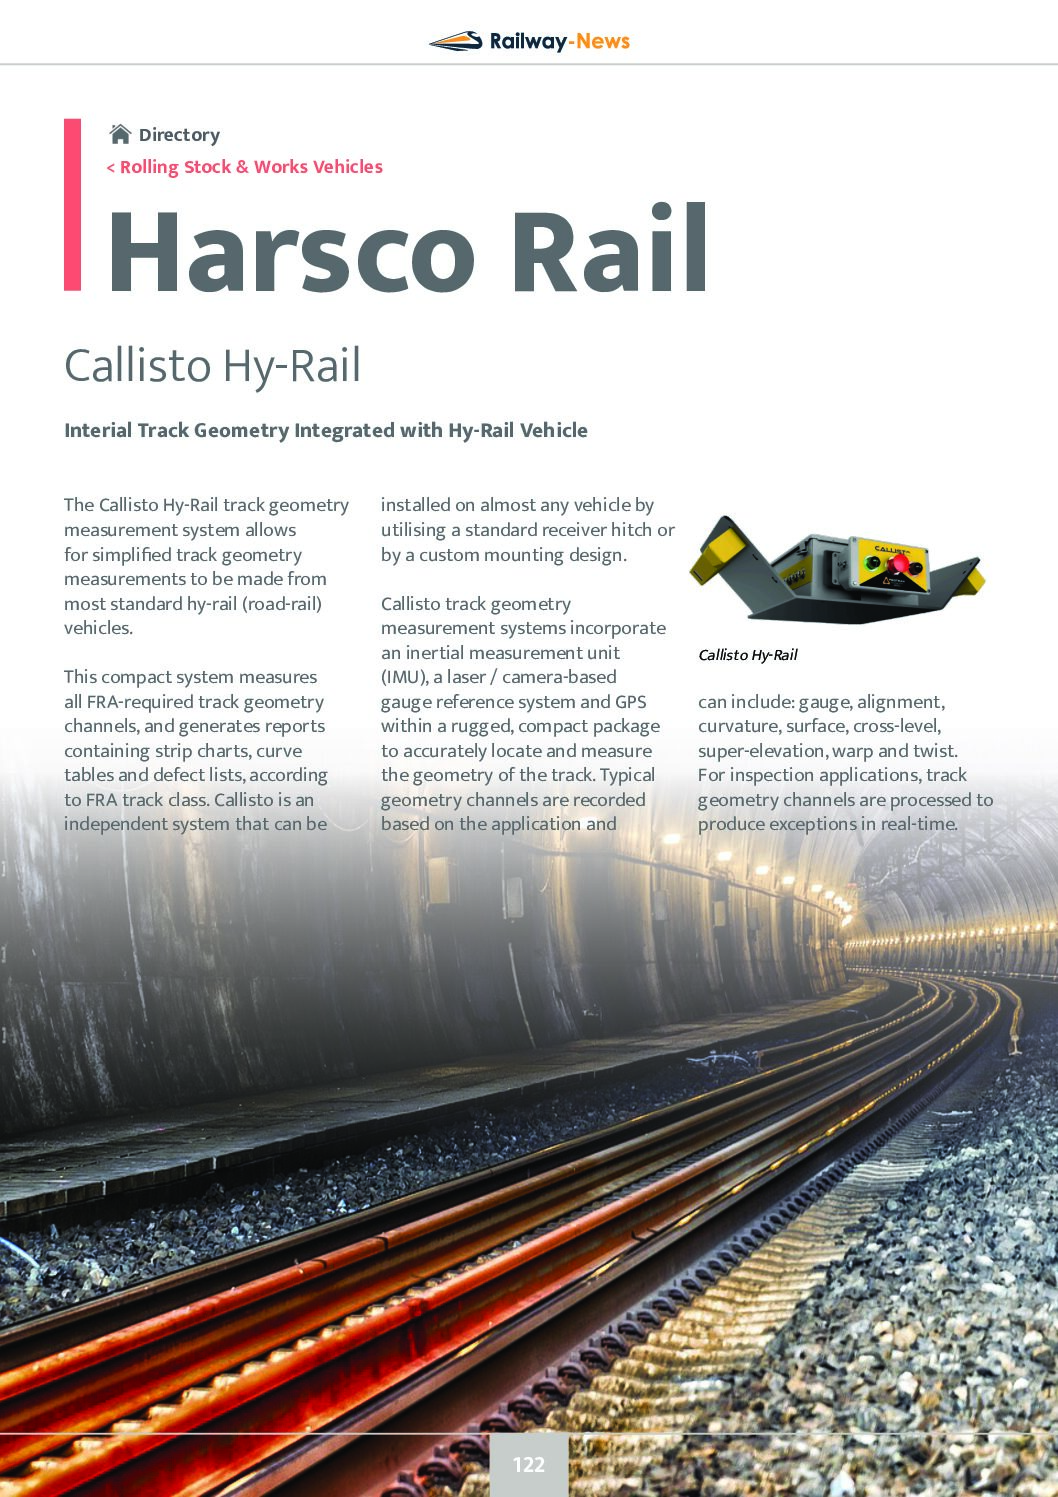 Callisto Hy-Rail: Inertial Track Geometry Integrated with Hy-Rail Vehicle